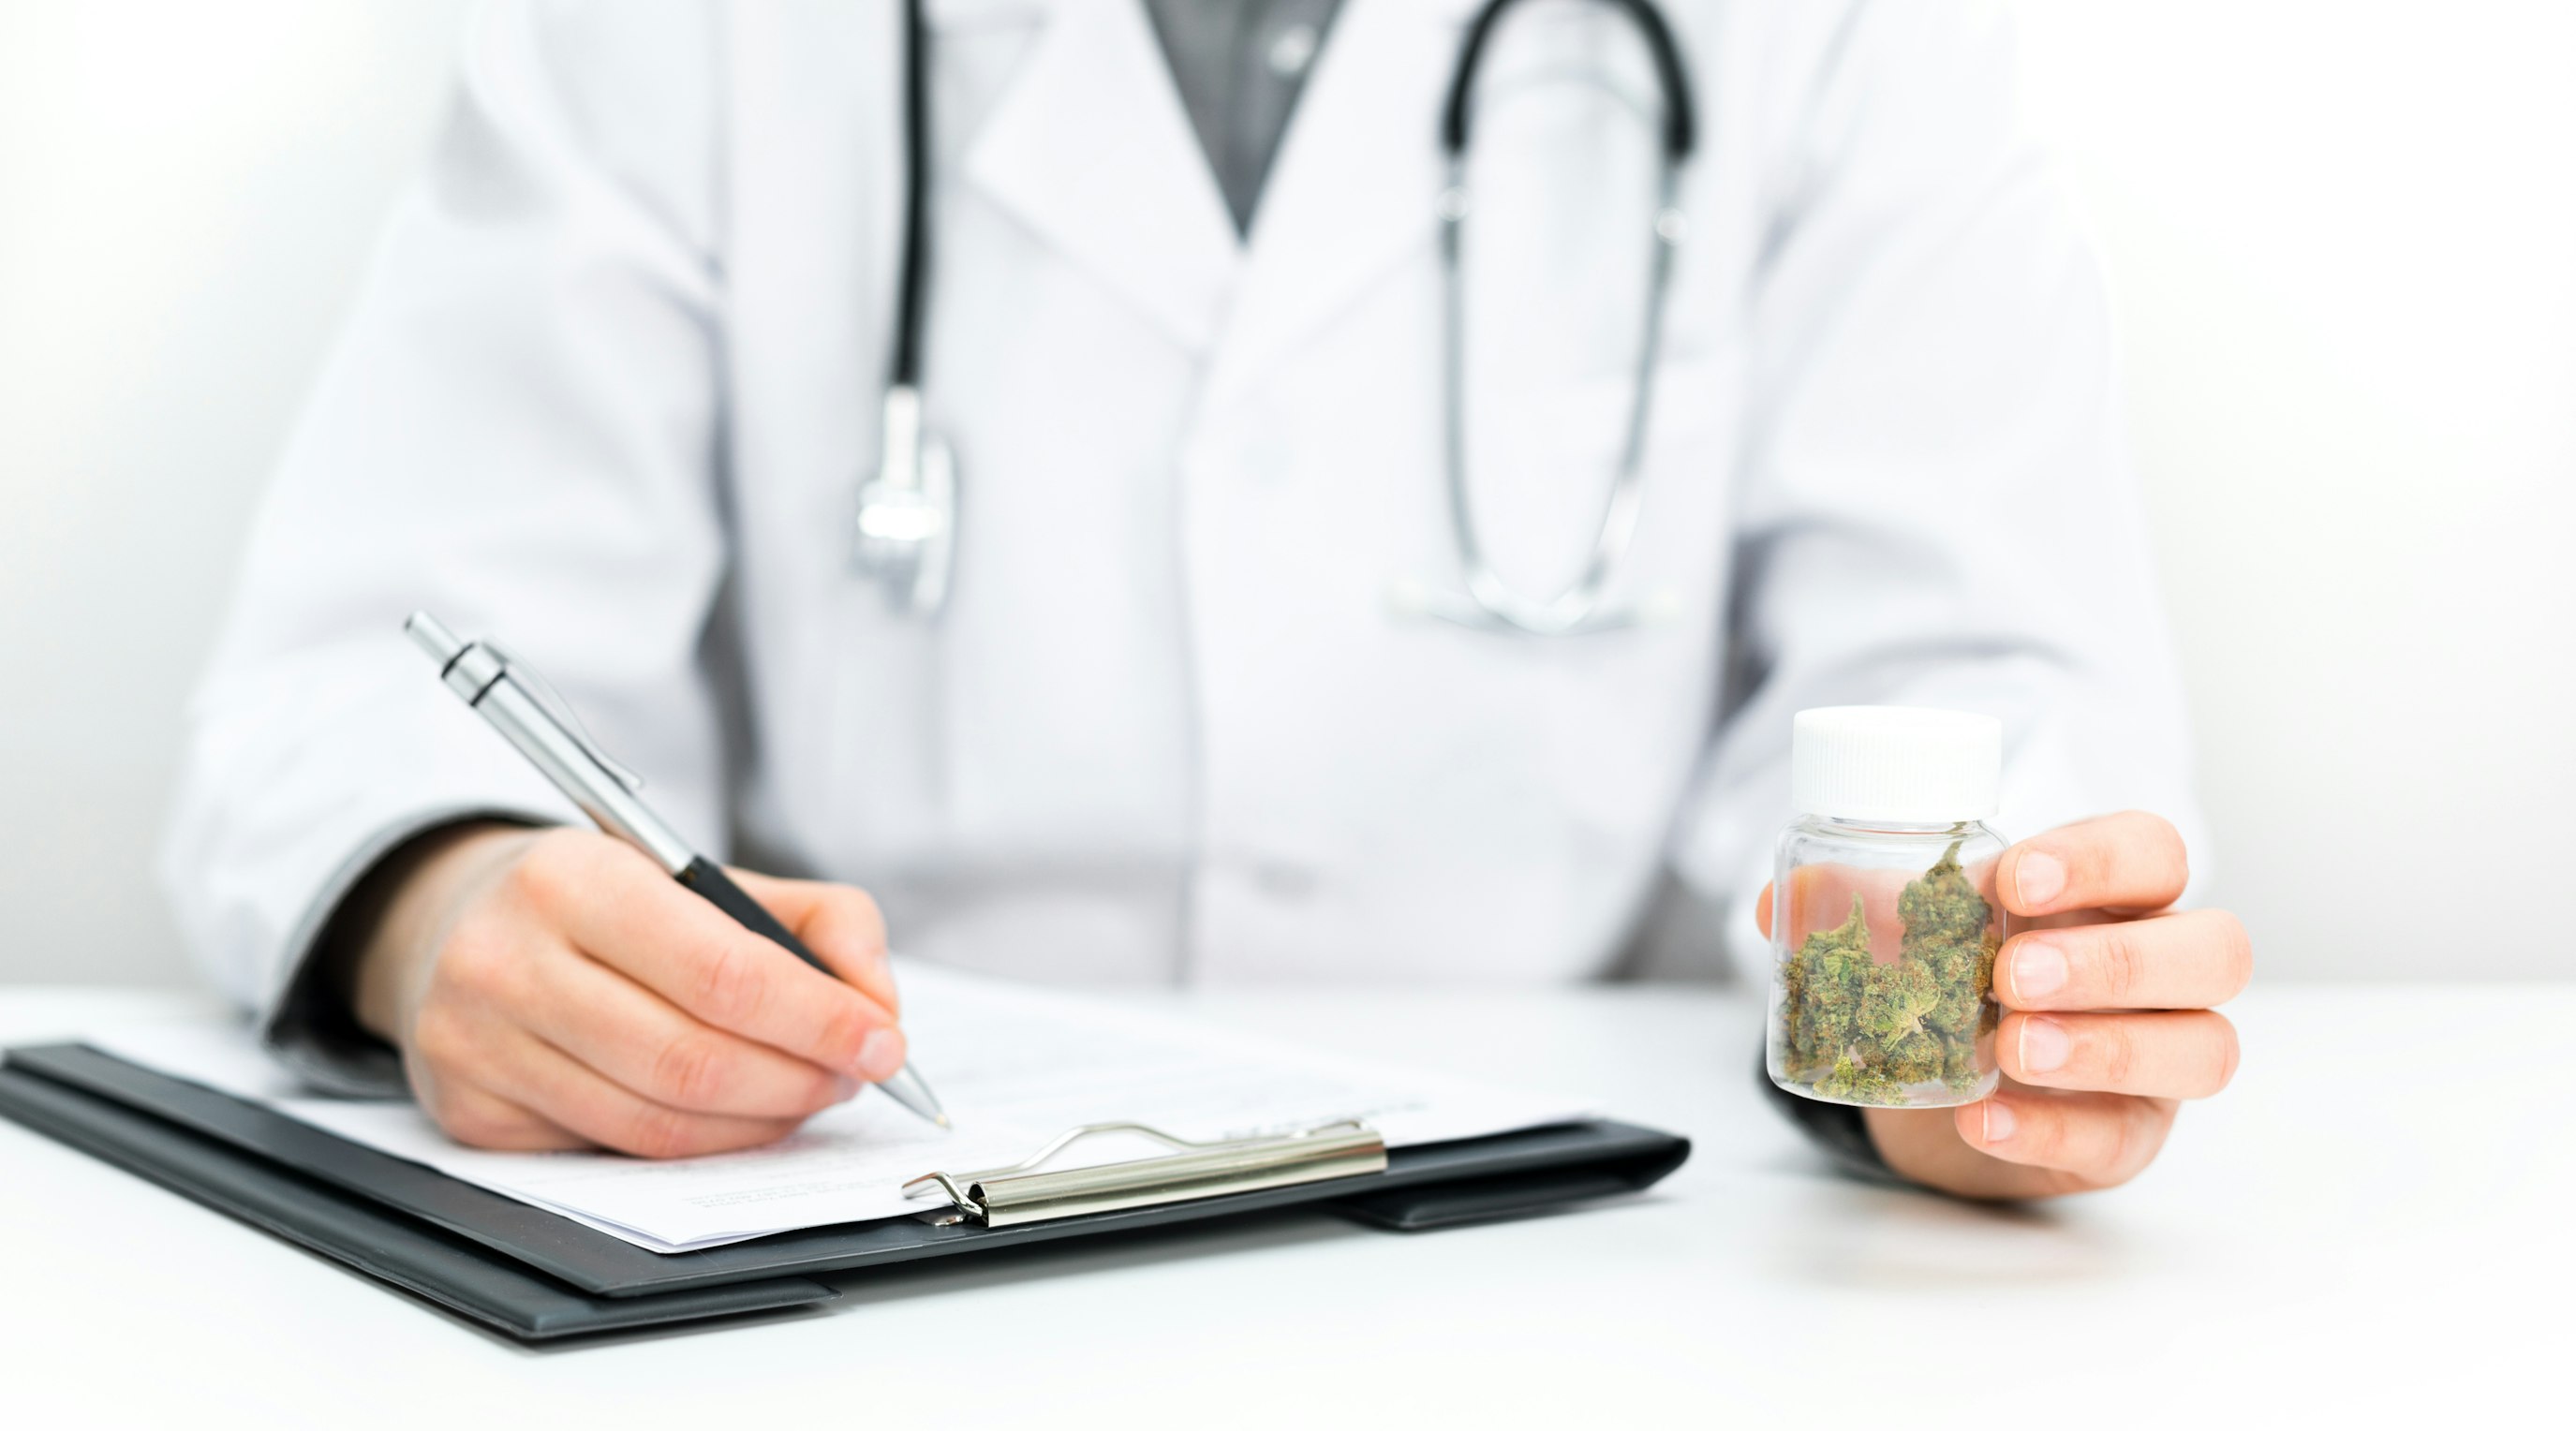 Statistic series: Five of the most impressive medical cannabis research statistics